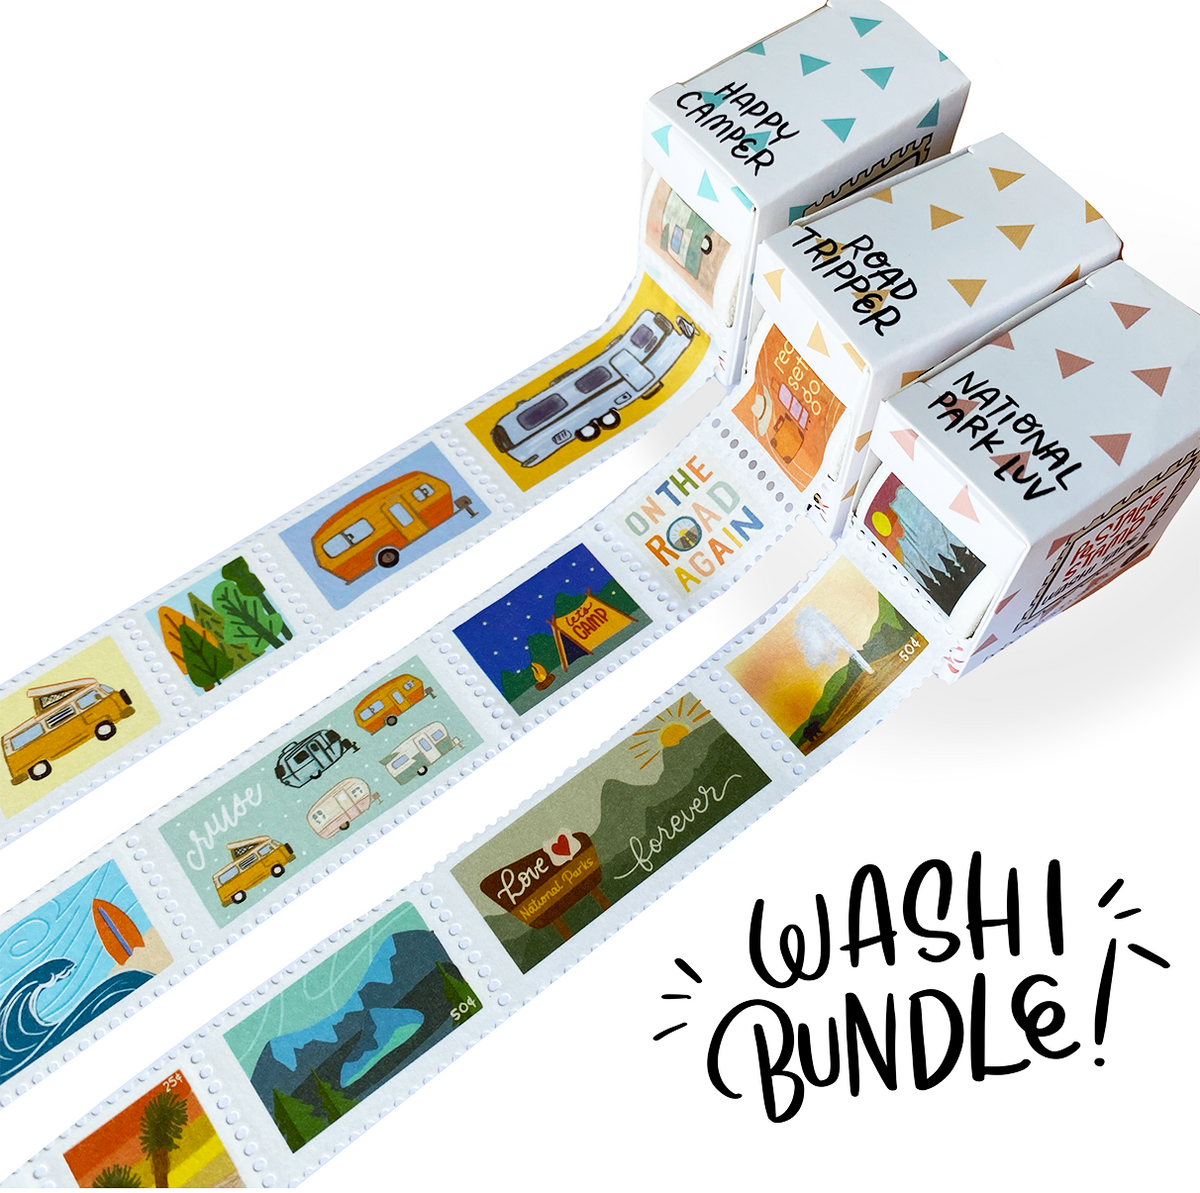 Postage Stamp Washi Tape Bundle featuring all the bobo design studio washi tapes in the postage stamp style with a bundle discount